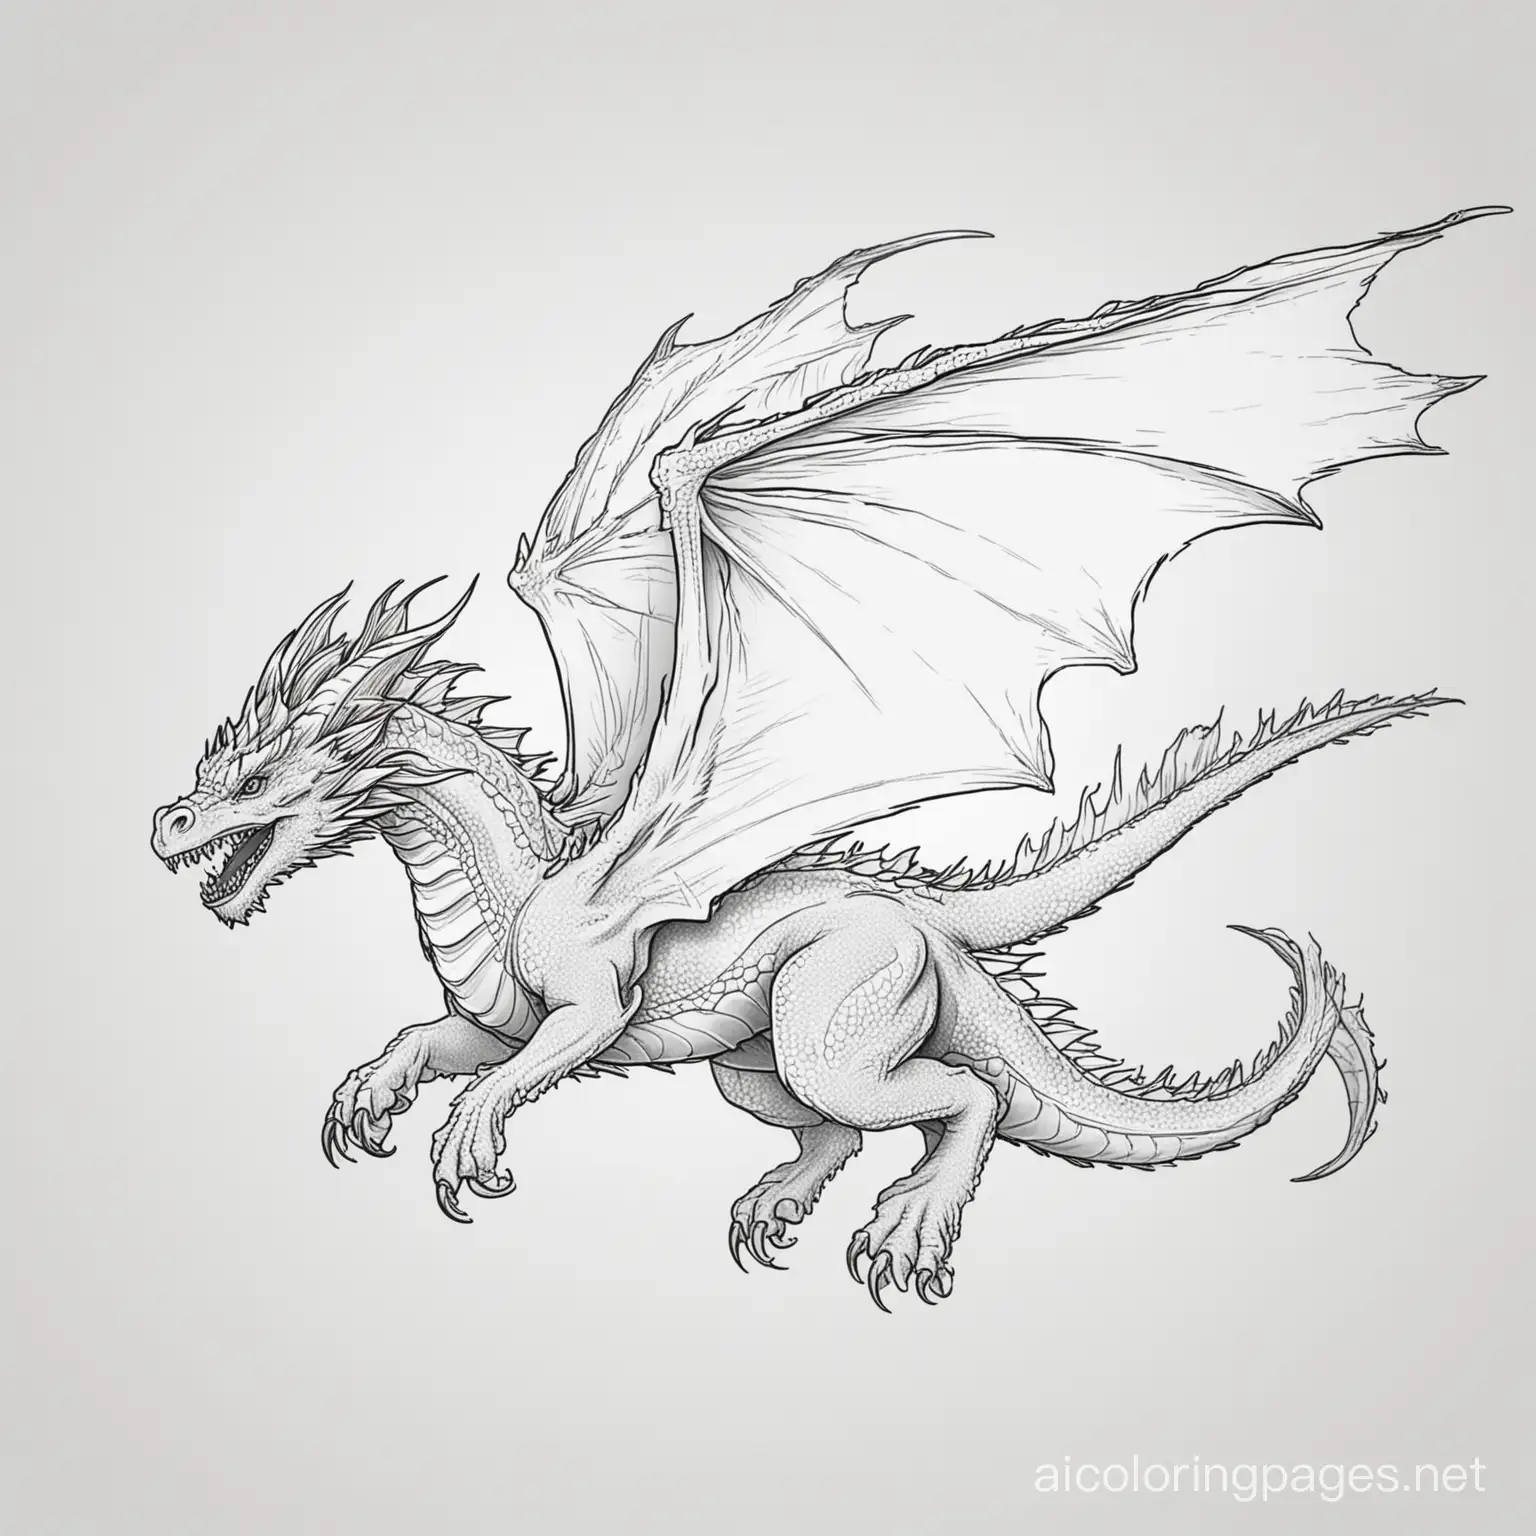 flying ice dragon , Coloring Page, black and white, line art, white background, Simplicity, Ample White Space. The background of the coloring page is plain white to make it easy for young children to color within the lines. The outlines of all the subjects are easy to distinguish, making it simple for kids to color without too much difficulty